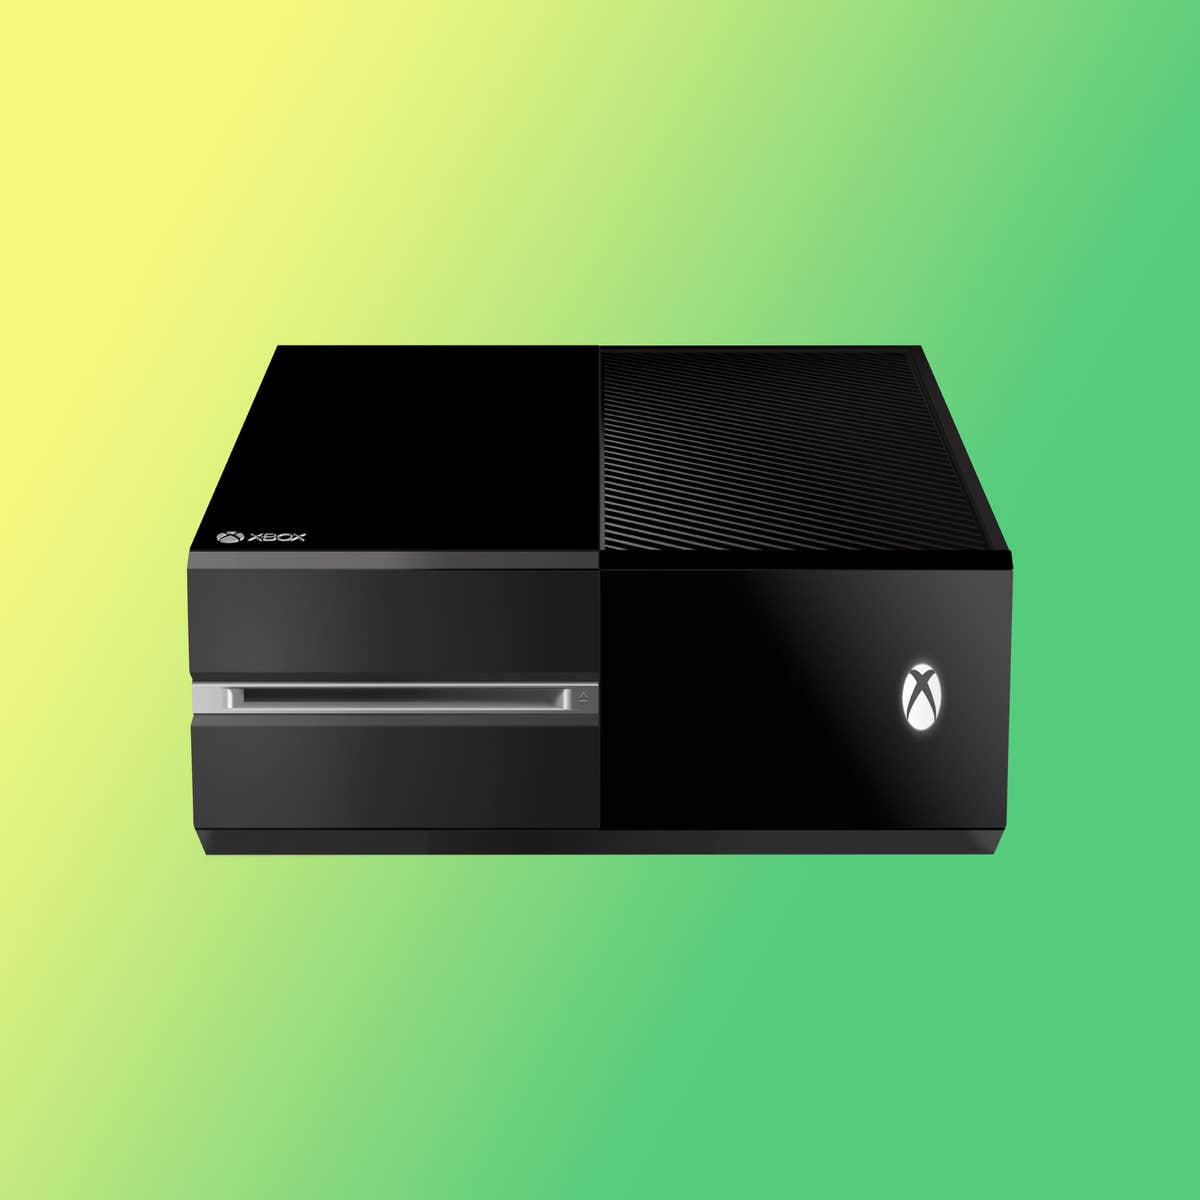 Microsoft discontinues Xbox One, PS4 rolls on in 2022 - 9to5Toys